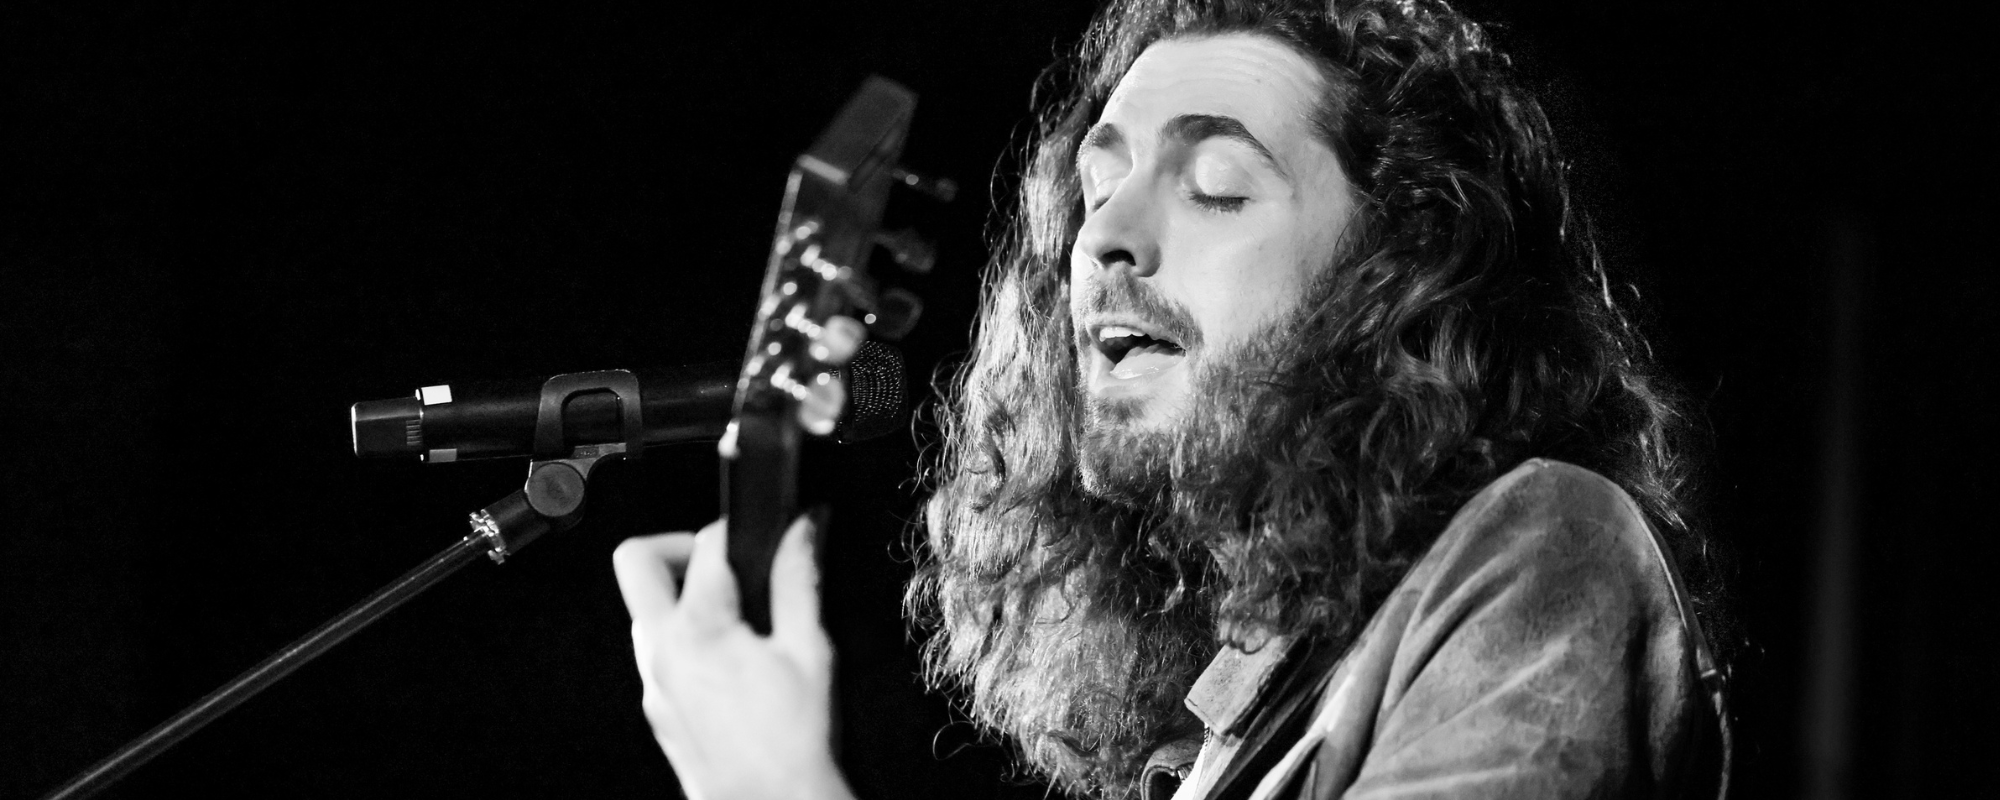 Hozier Unreal Unearth World Tour 20232024 How To Buy Tickets And